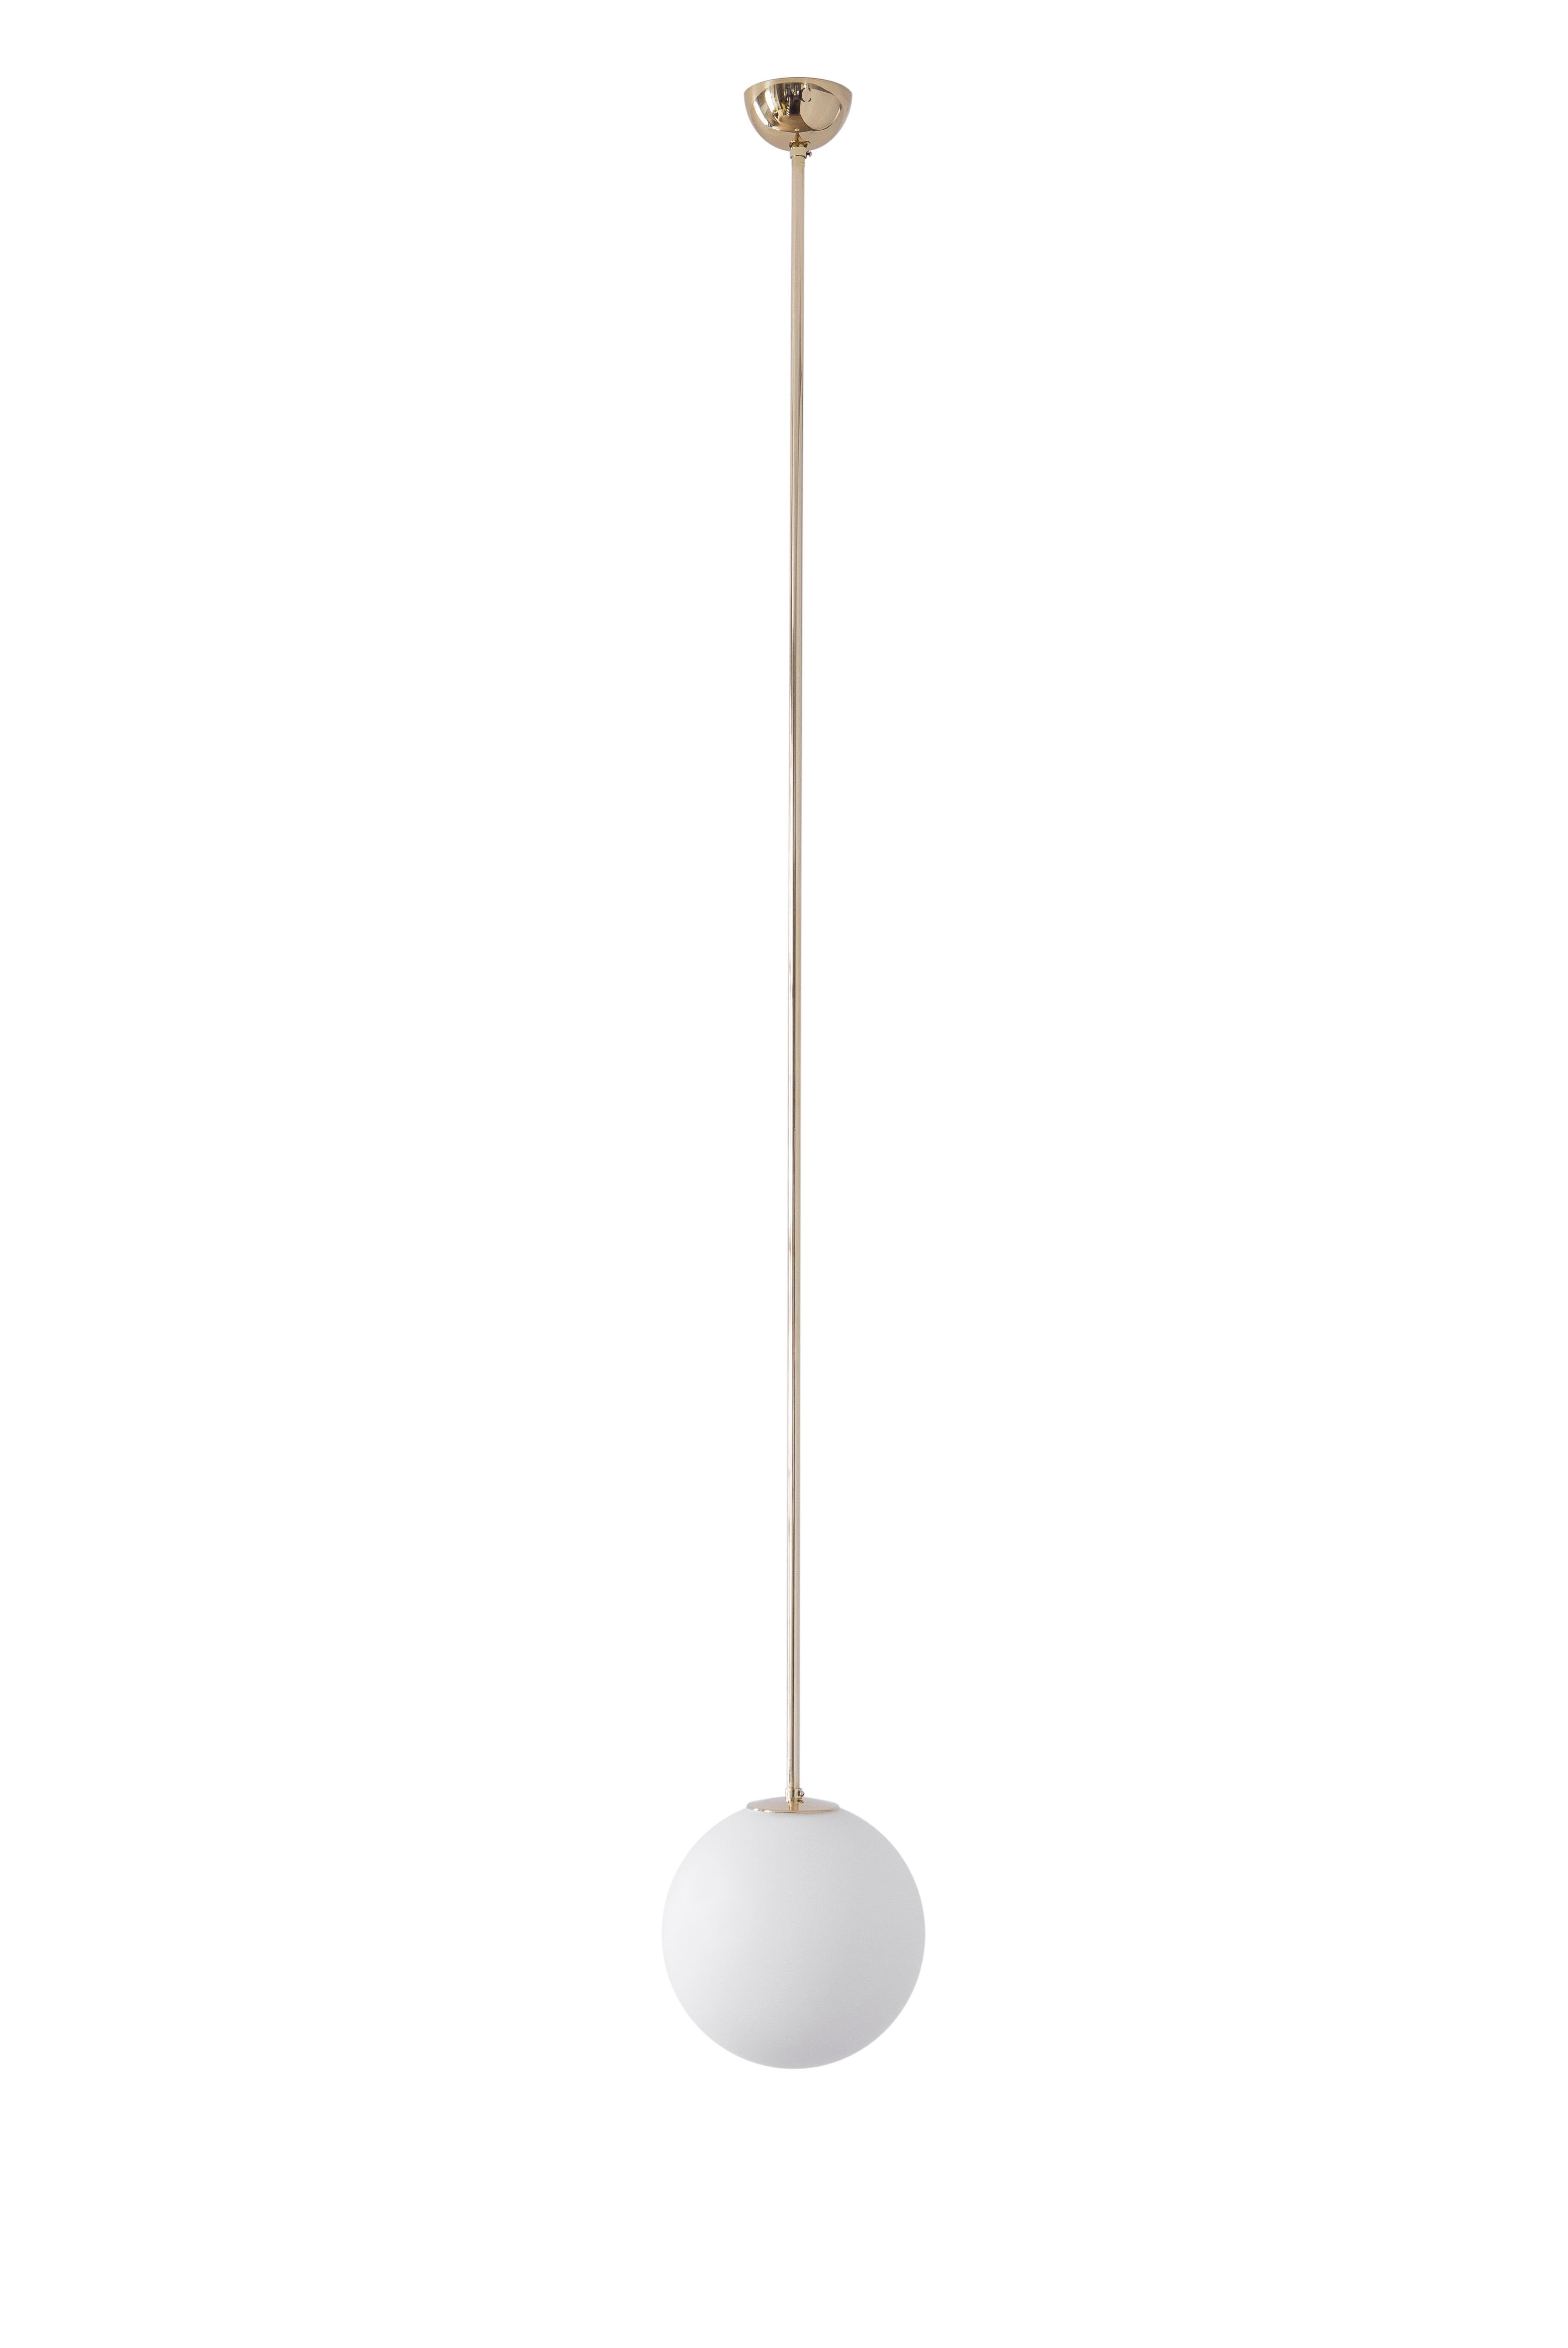 Pendant 06 by Magic Circus Editions
Dimensions: D 25 x W 25 x H 150 cm, also available in H 90, 110, 130, 175, 190 cm
Materials: Brass, mouth blown glass

All our lamps can be wired according to each country. If sold to the USA it will be wired